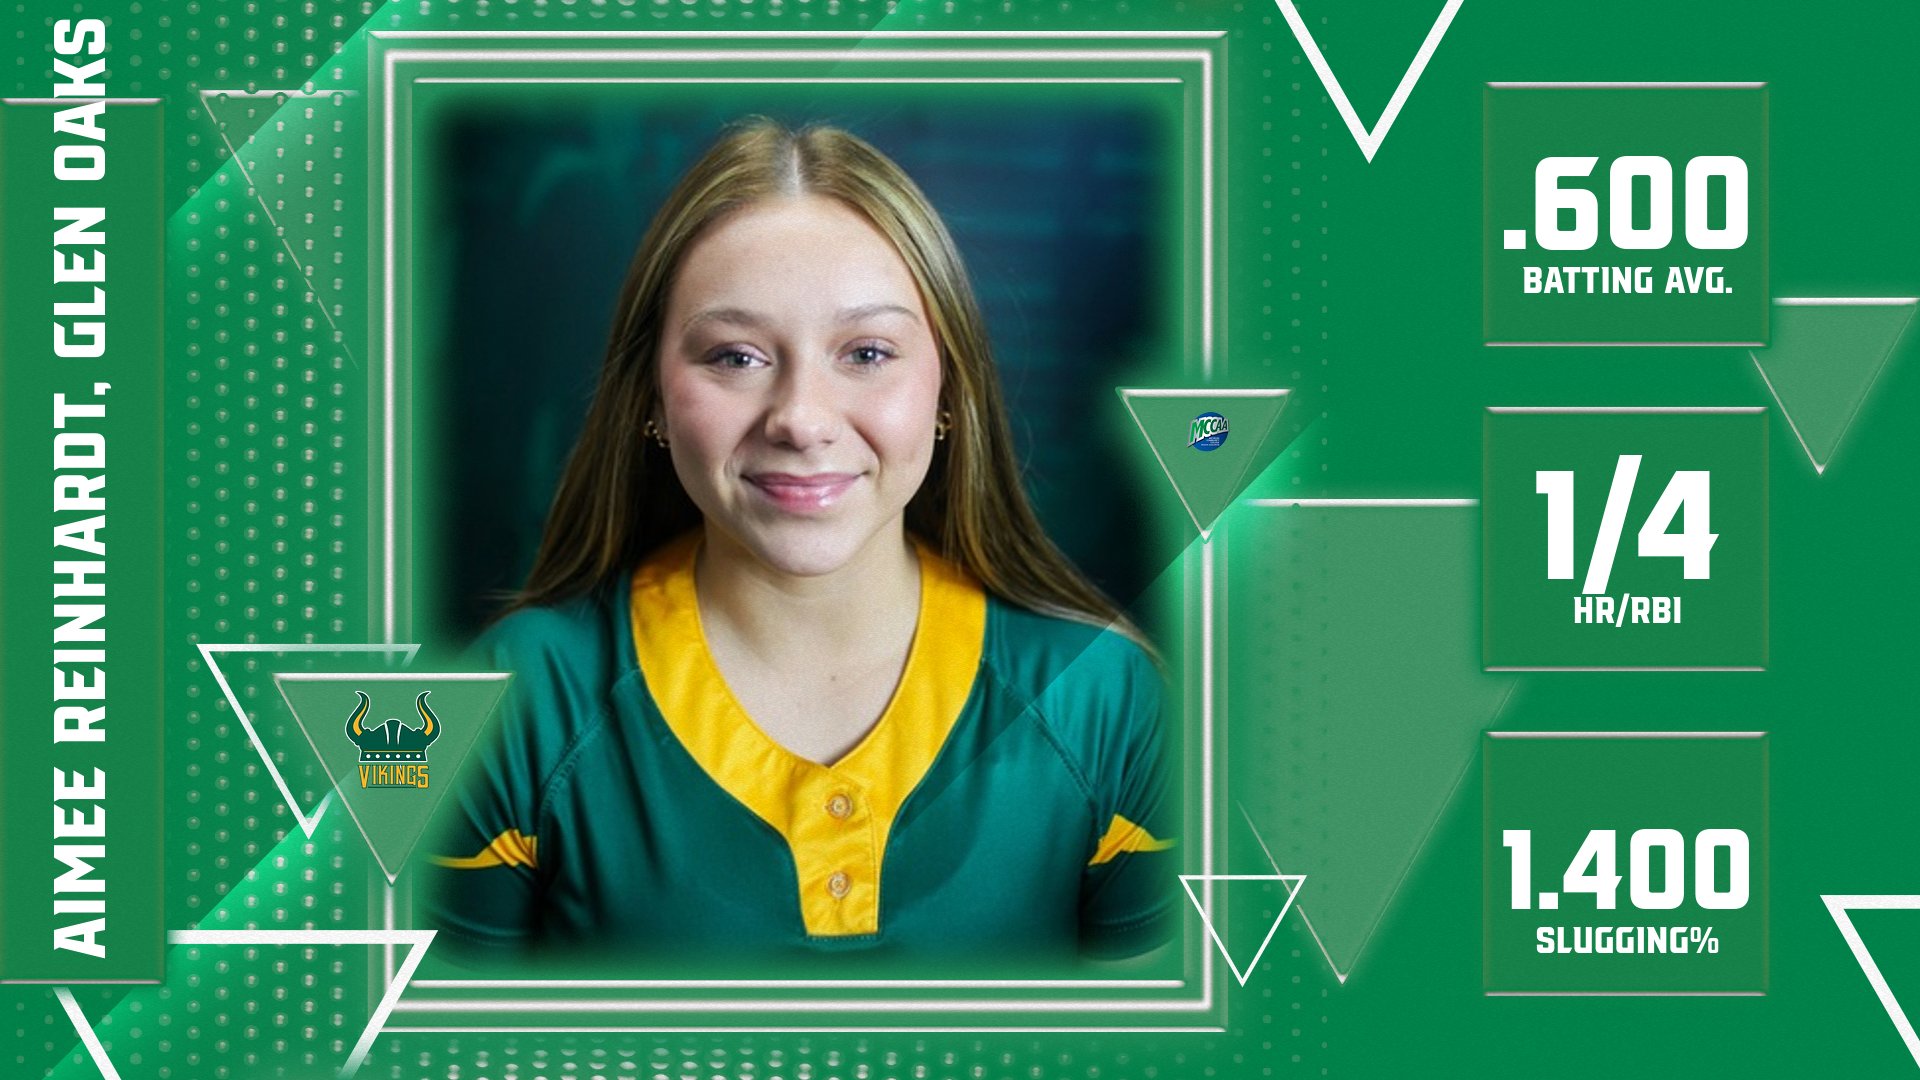 Glen Oaks' Reinhardt Tapped MCCAA Western Conference Softball Player of the Week3